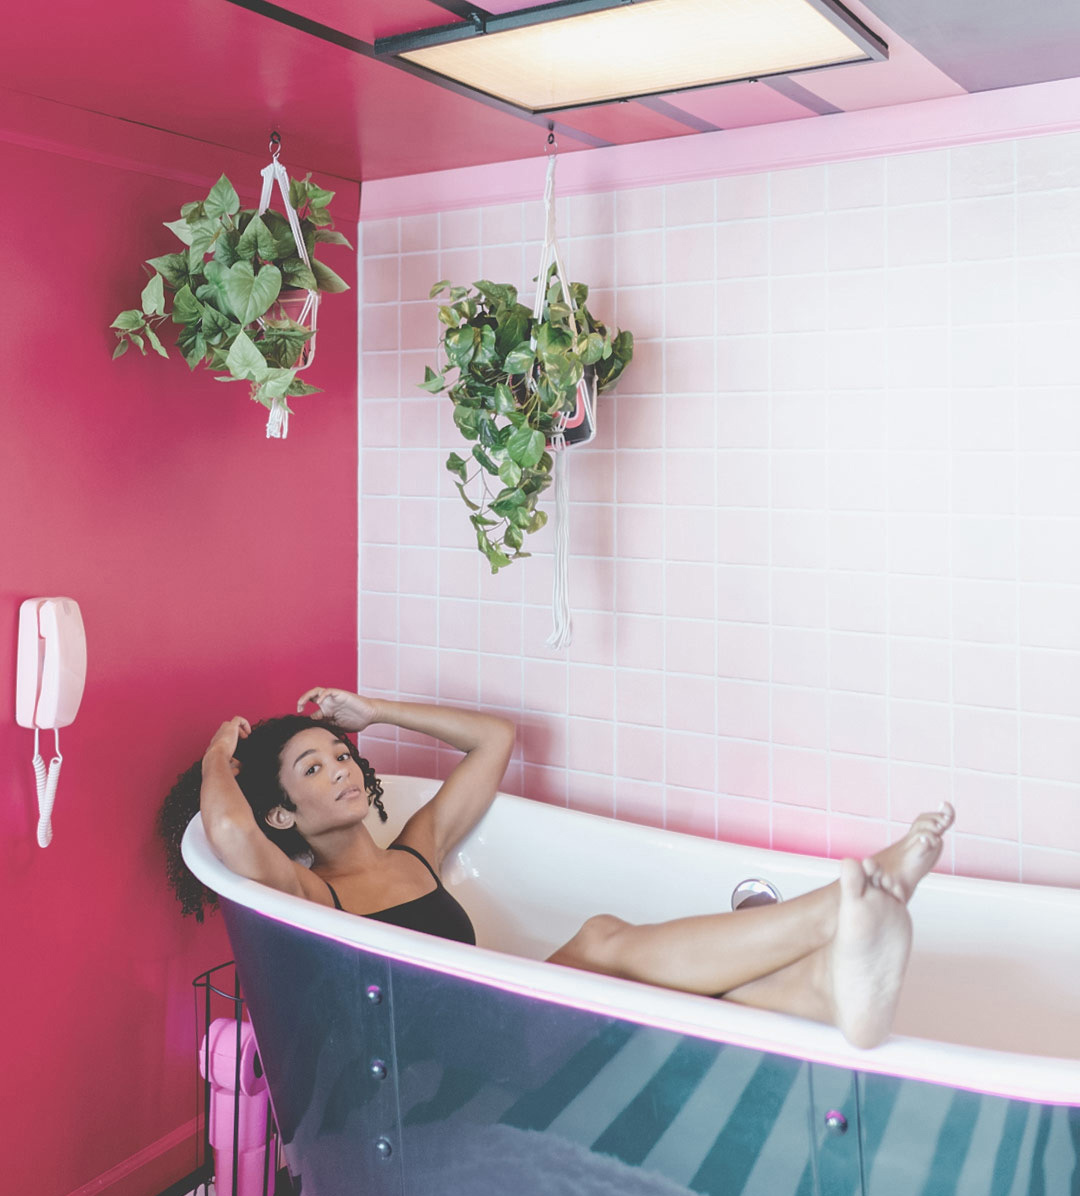 Razzle Dazzle pink bathroom with a young woman in the tub and two hanging plants